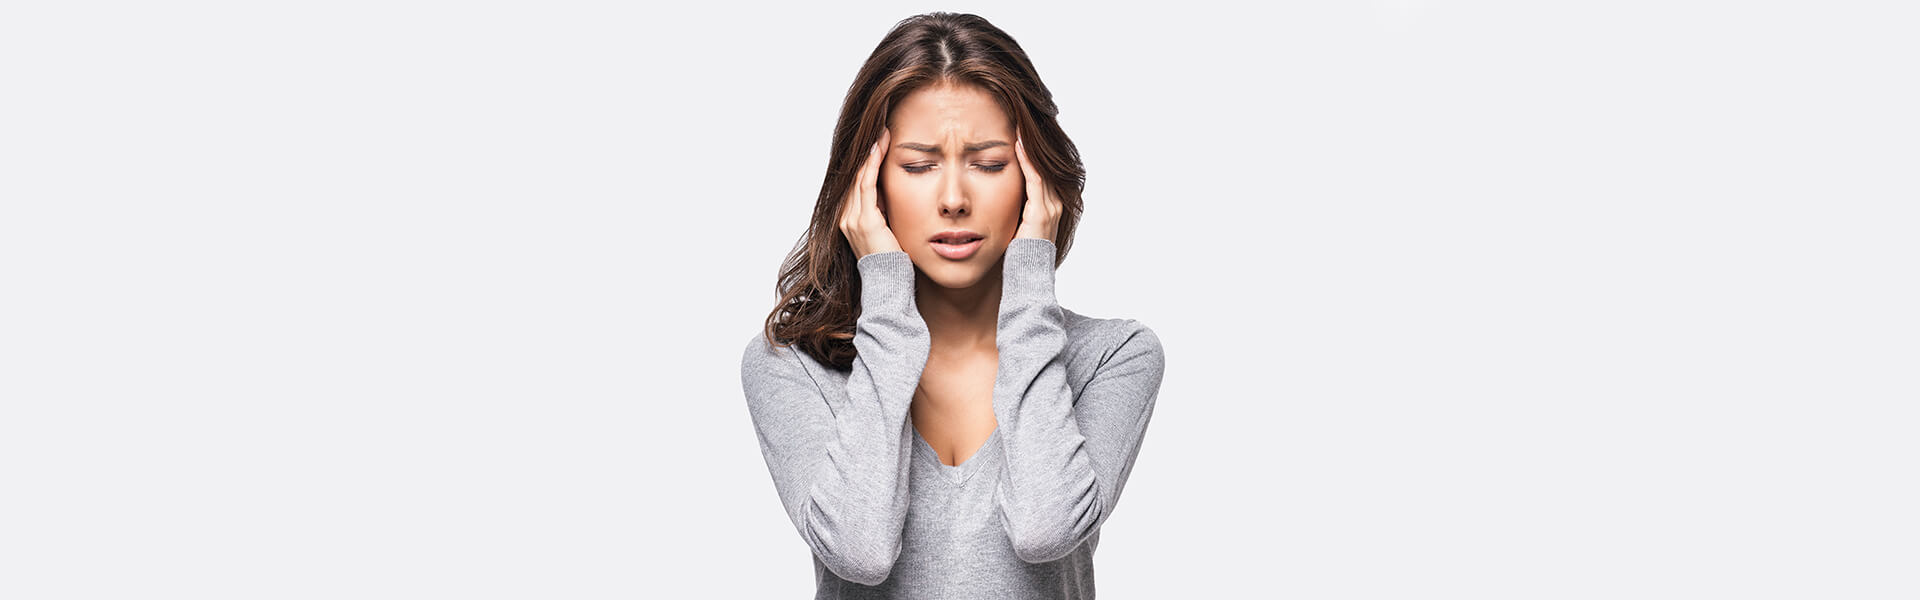 Migraine Headaches 101: Types, Causes, Symptoms, and Treatment Options